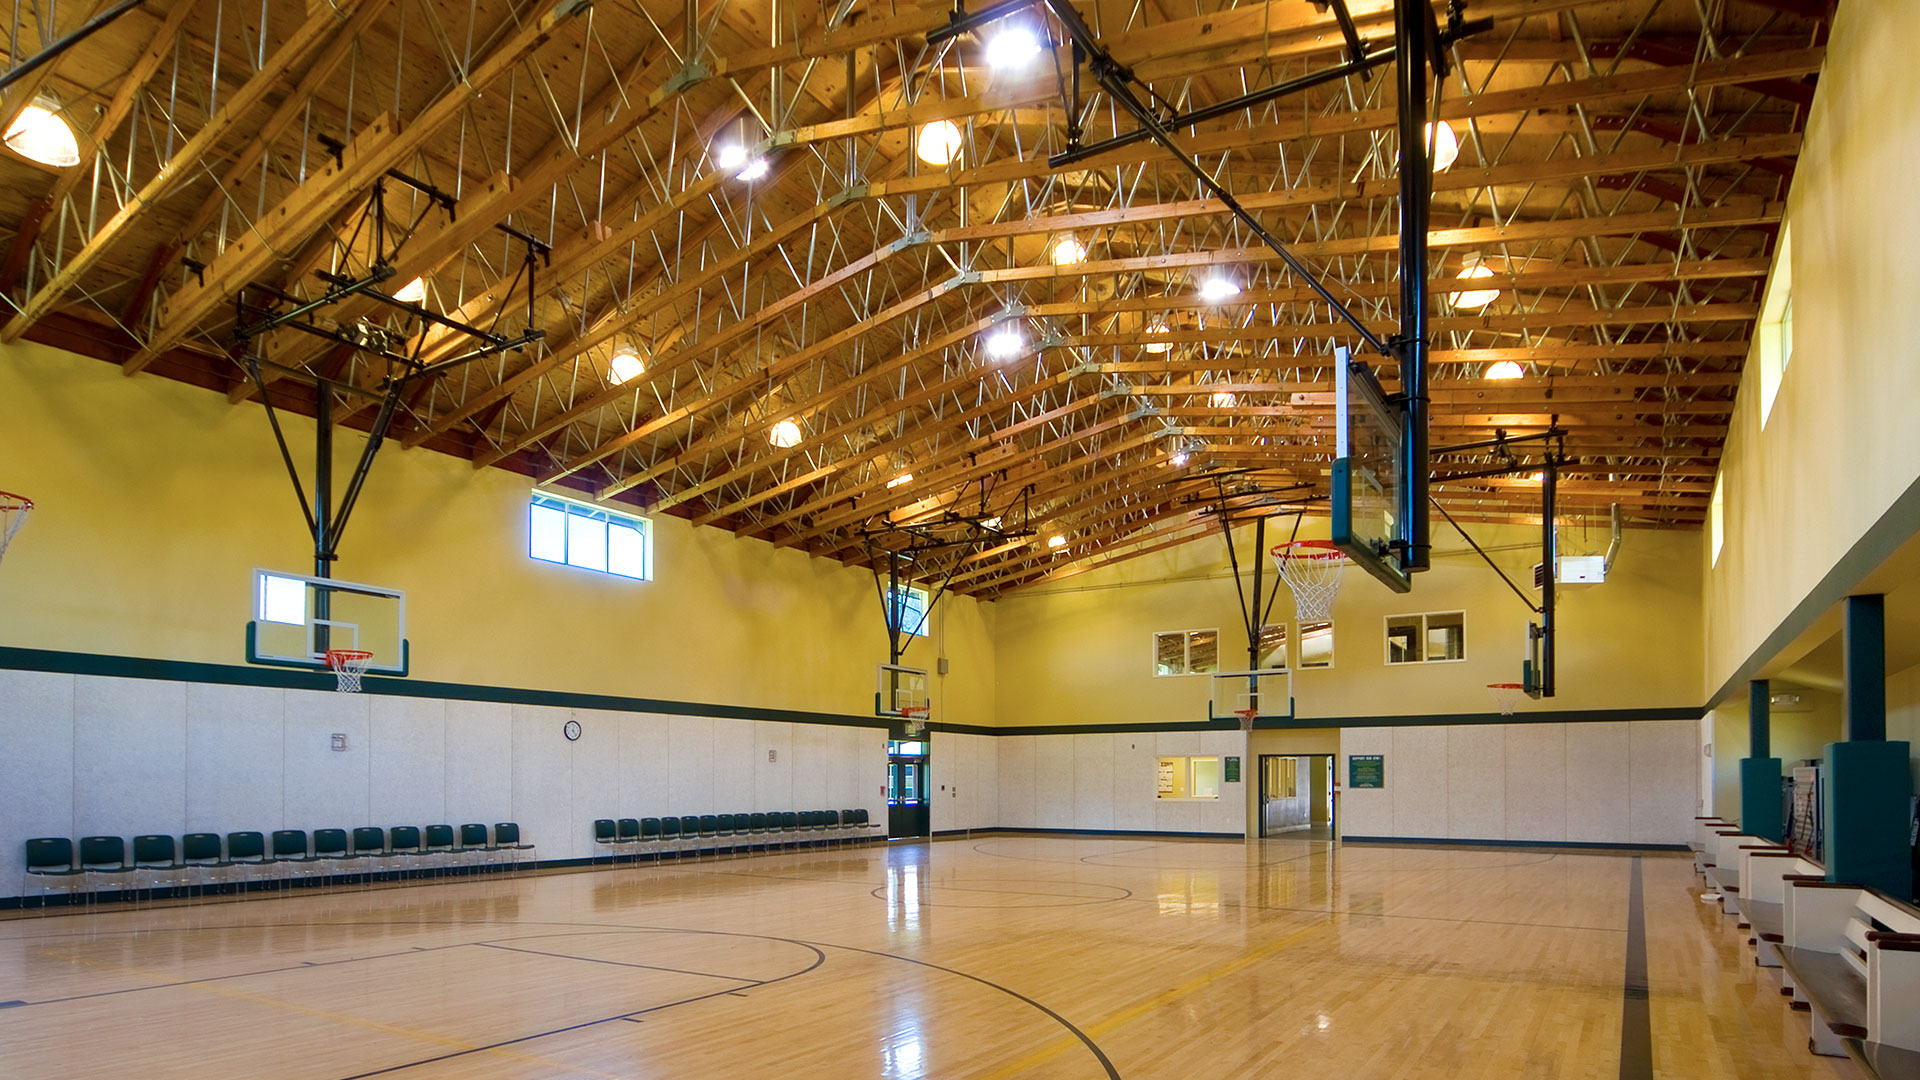 Gymnasium interior and basketball court, with intricate exposed wood trusses above yellow walls and white wainscot.